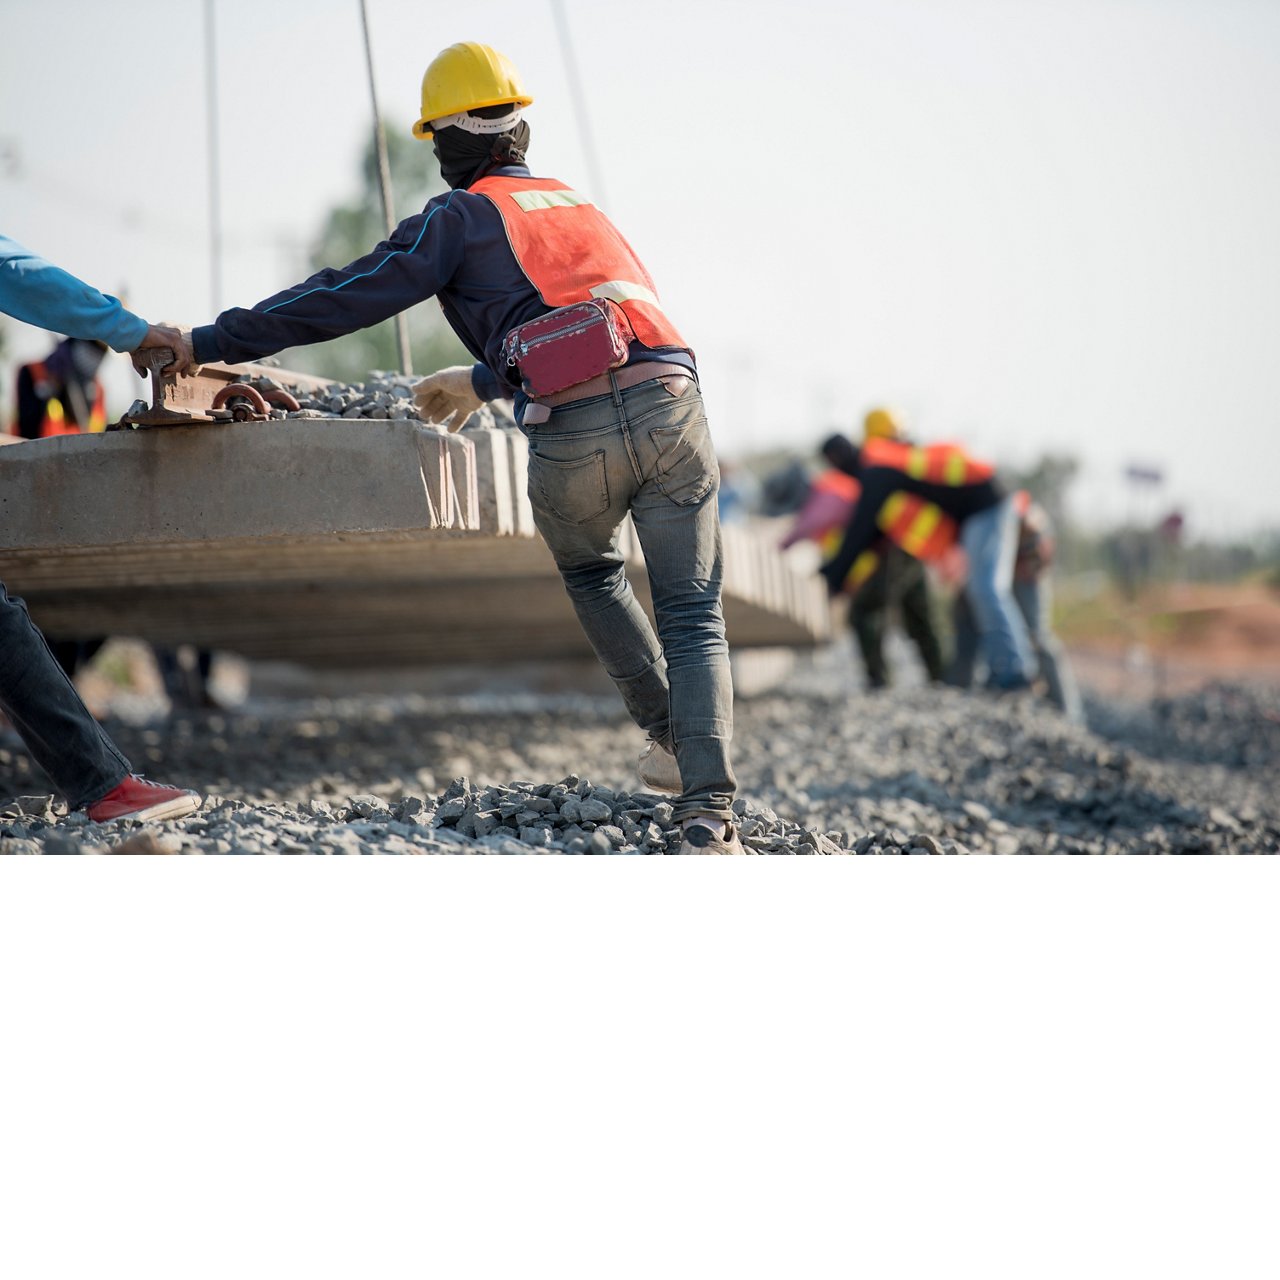 construction worker in construction site safety uniform; Shutterstock ID 596650529; purchase_order: CON; job: CON; client: CON; other:
596650529
CON